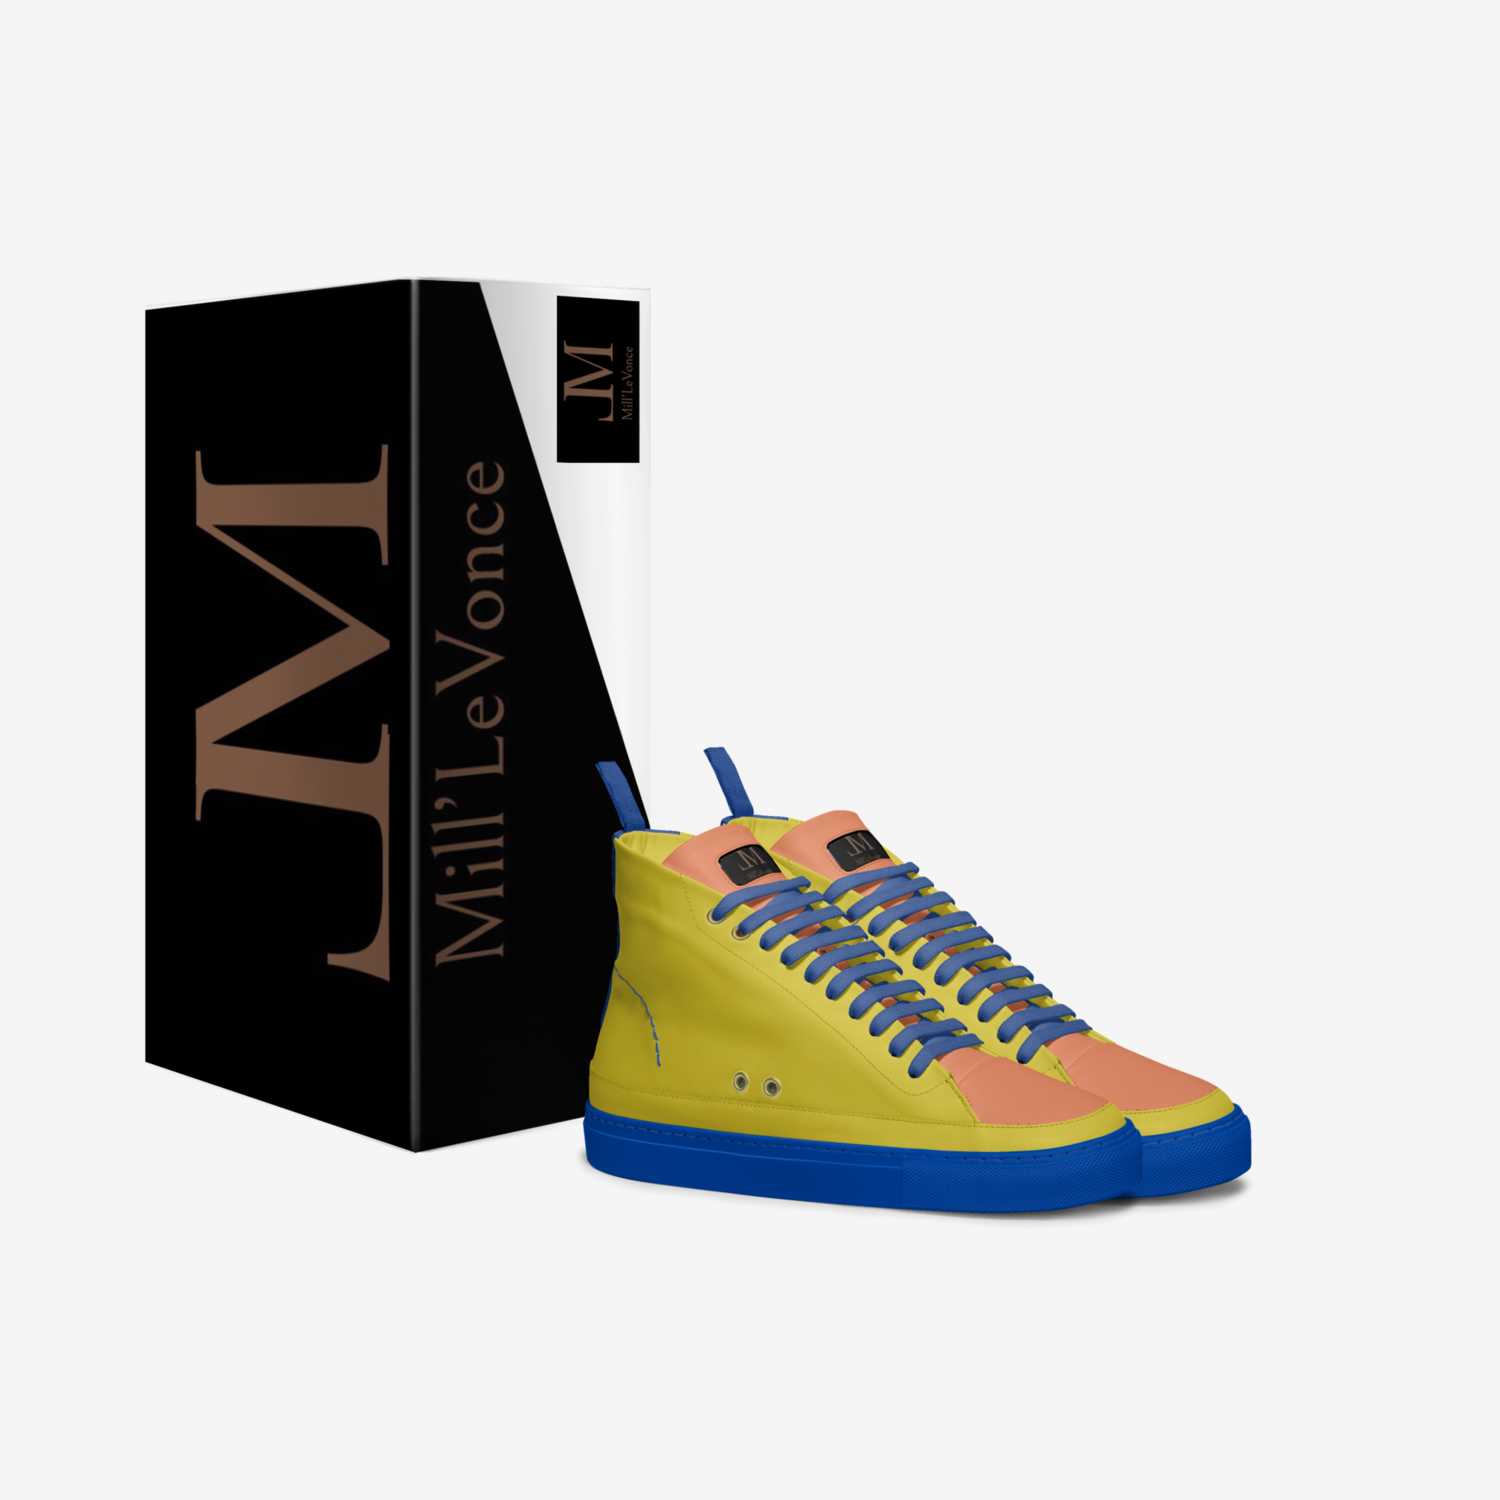 Mill'levonce  custom made in Italy shoes by Levonte Sanders | Box view